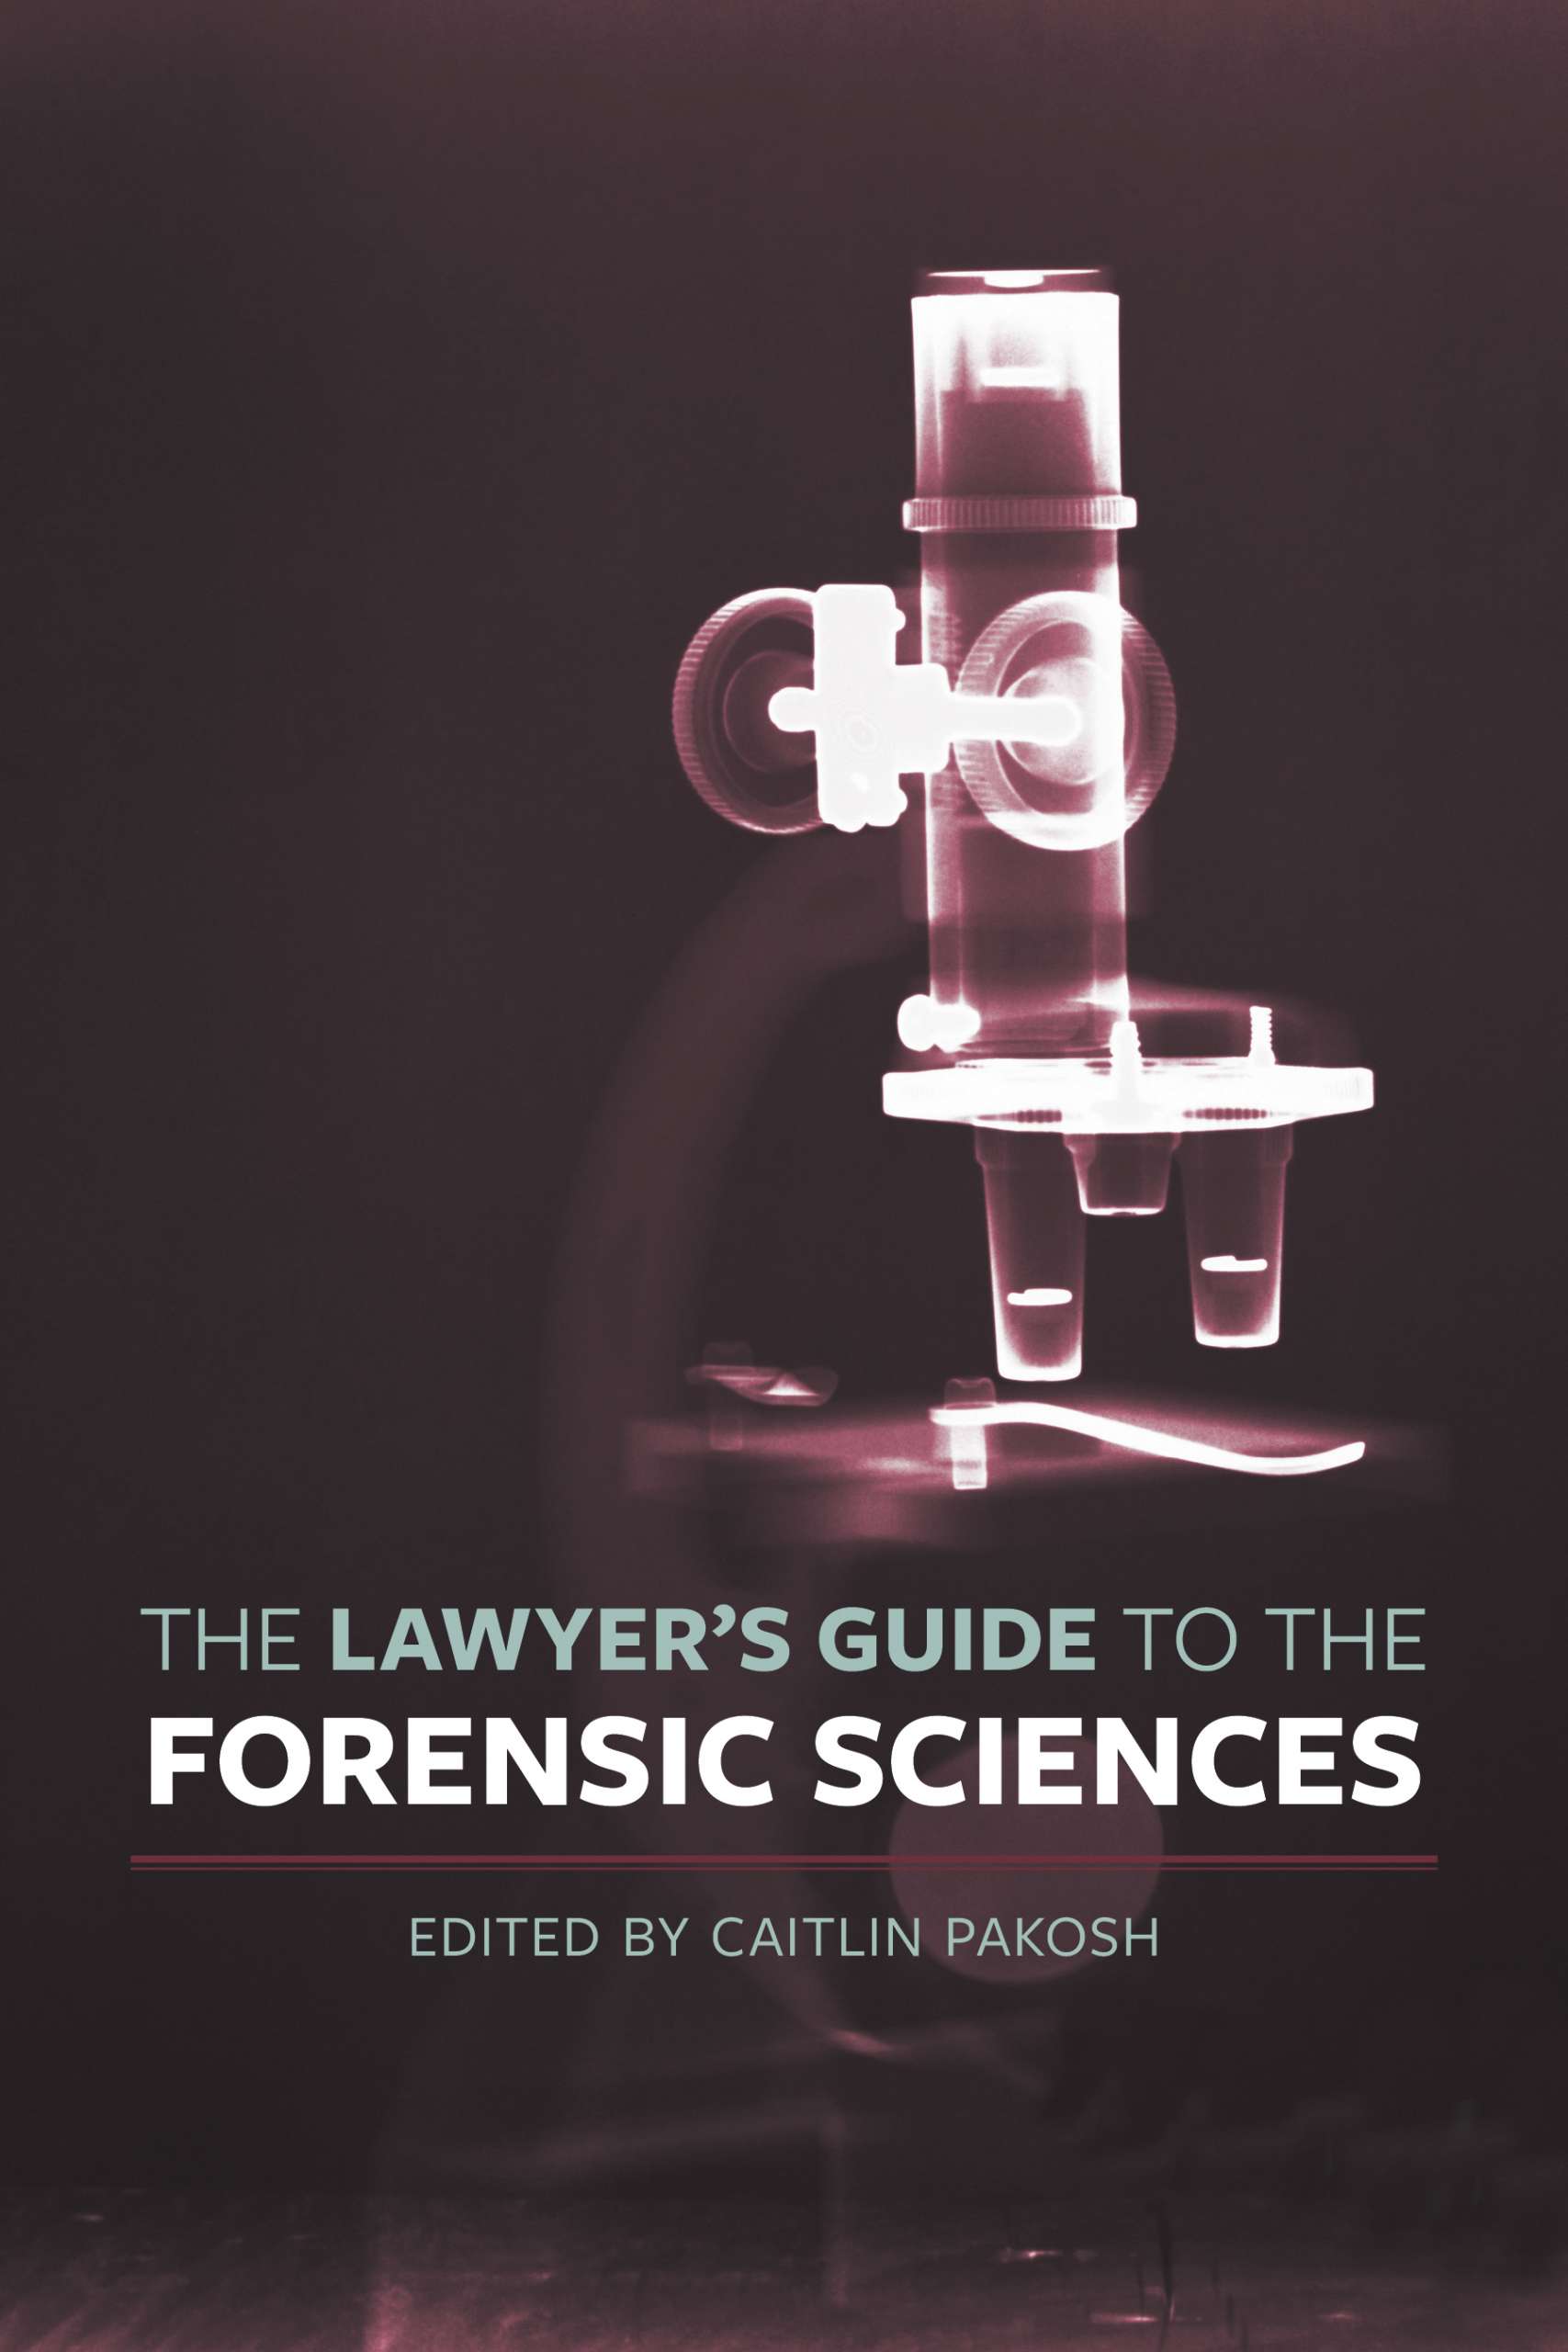 The Lawyer's Guide to the Forensic Sciences